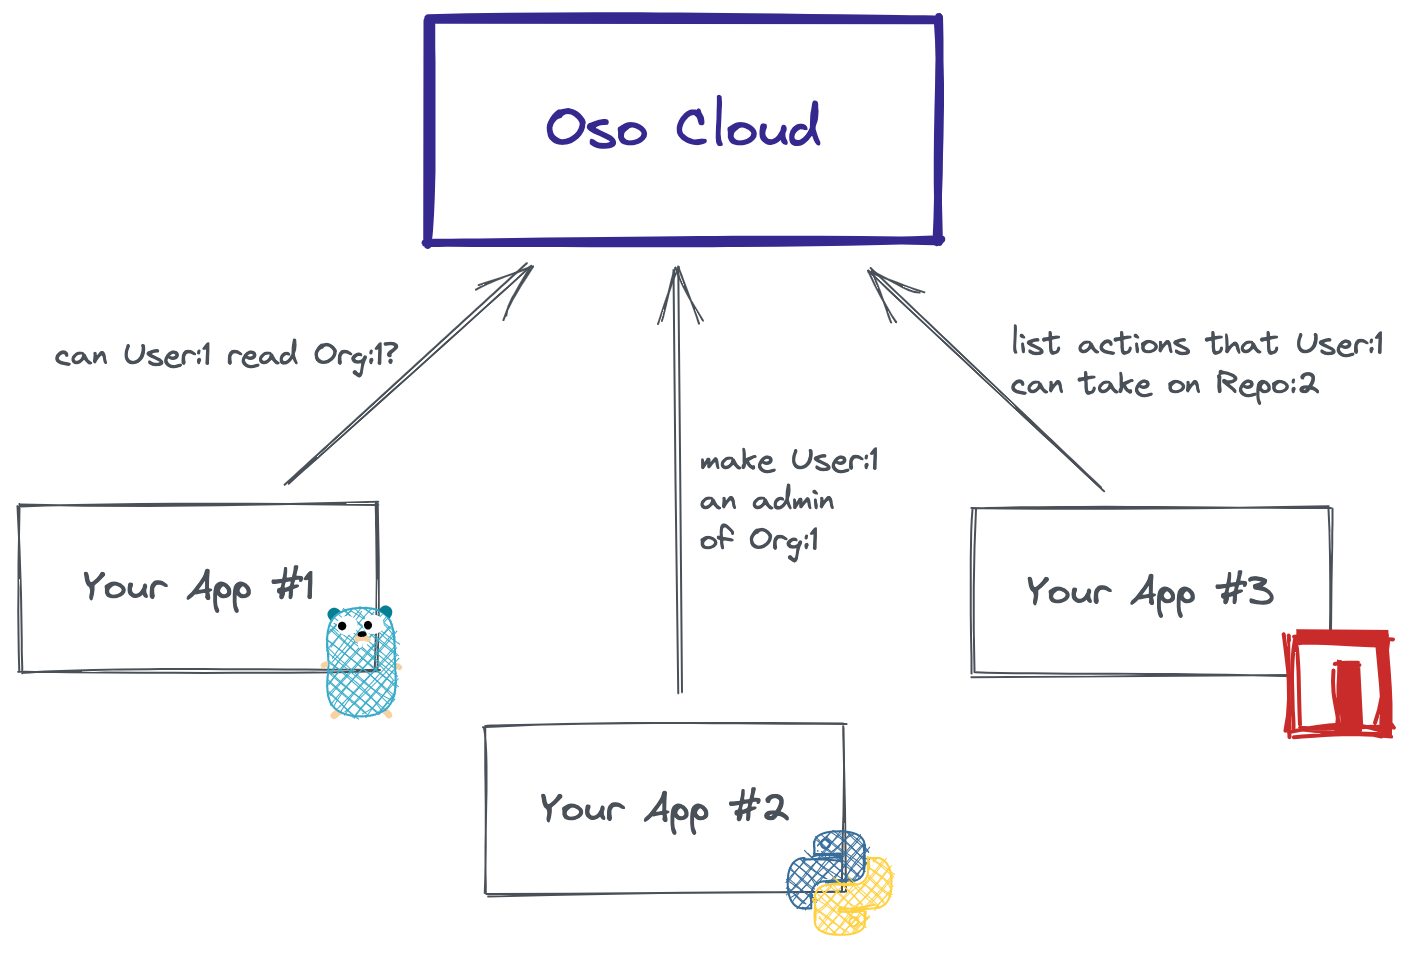 Basic Architecture of Oso Cloud: Your Apps all talk to Oso Cloud over an HTTP API